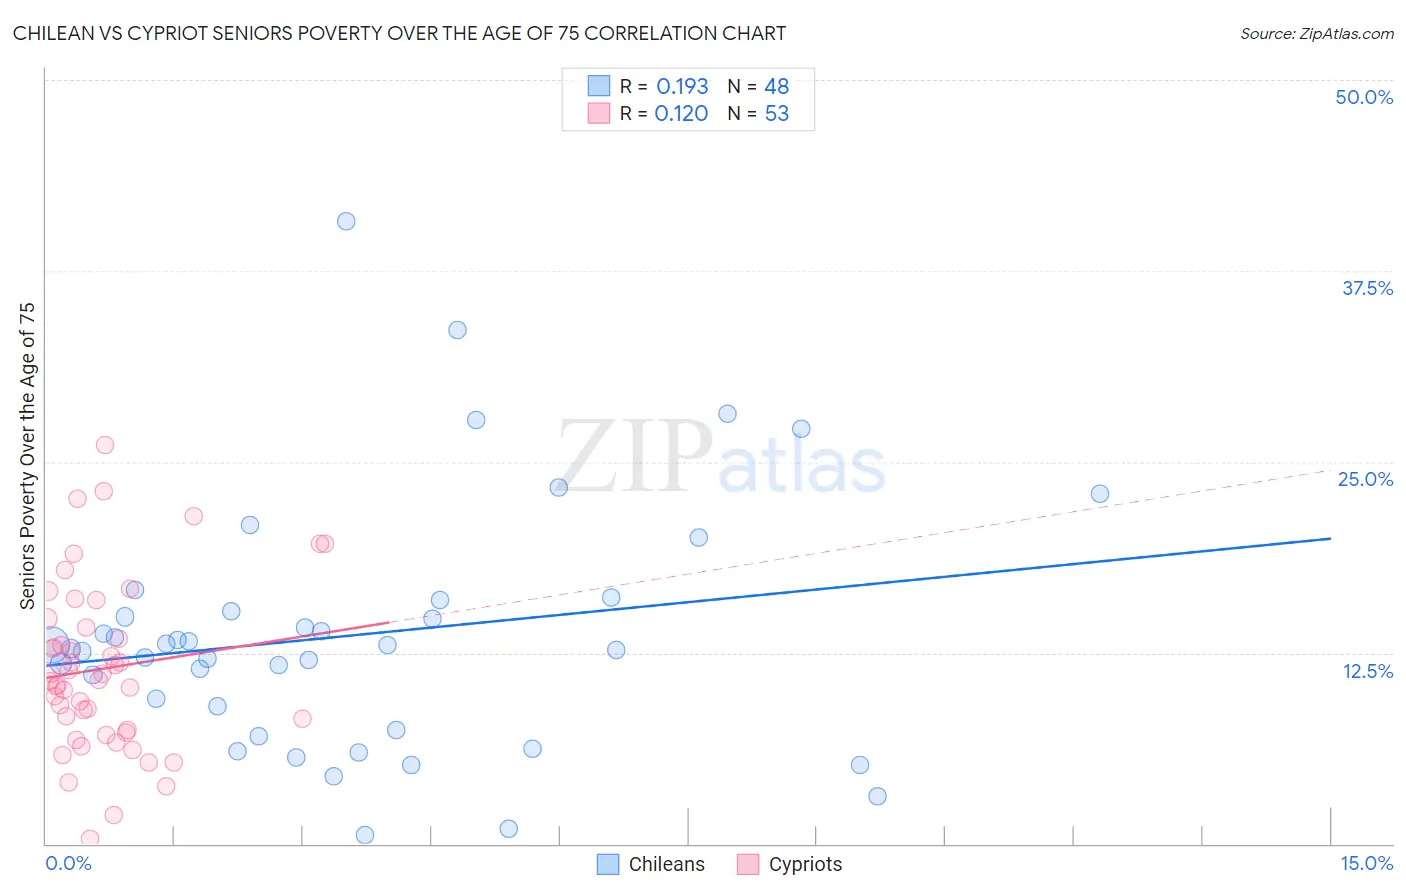 Chilean vs Cypriot Seniors Poverty Over the Age of 75